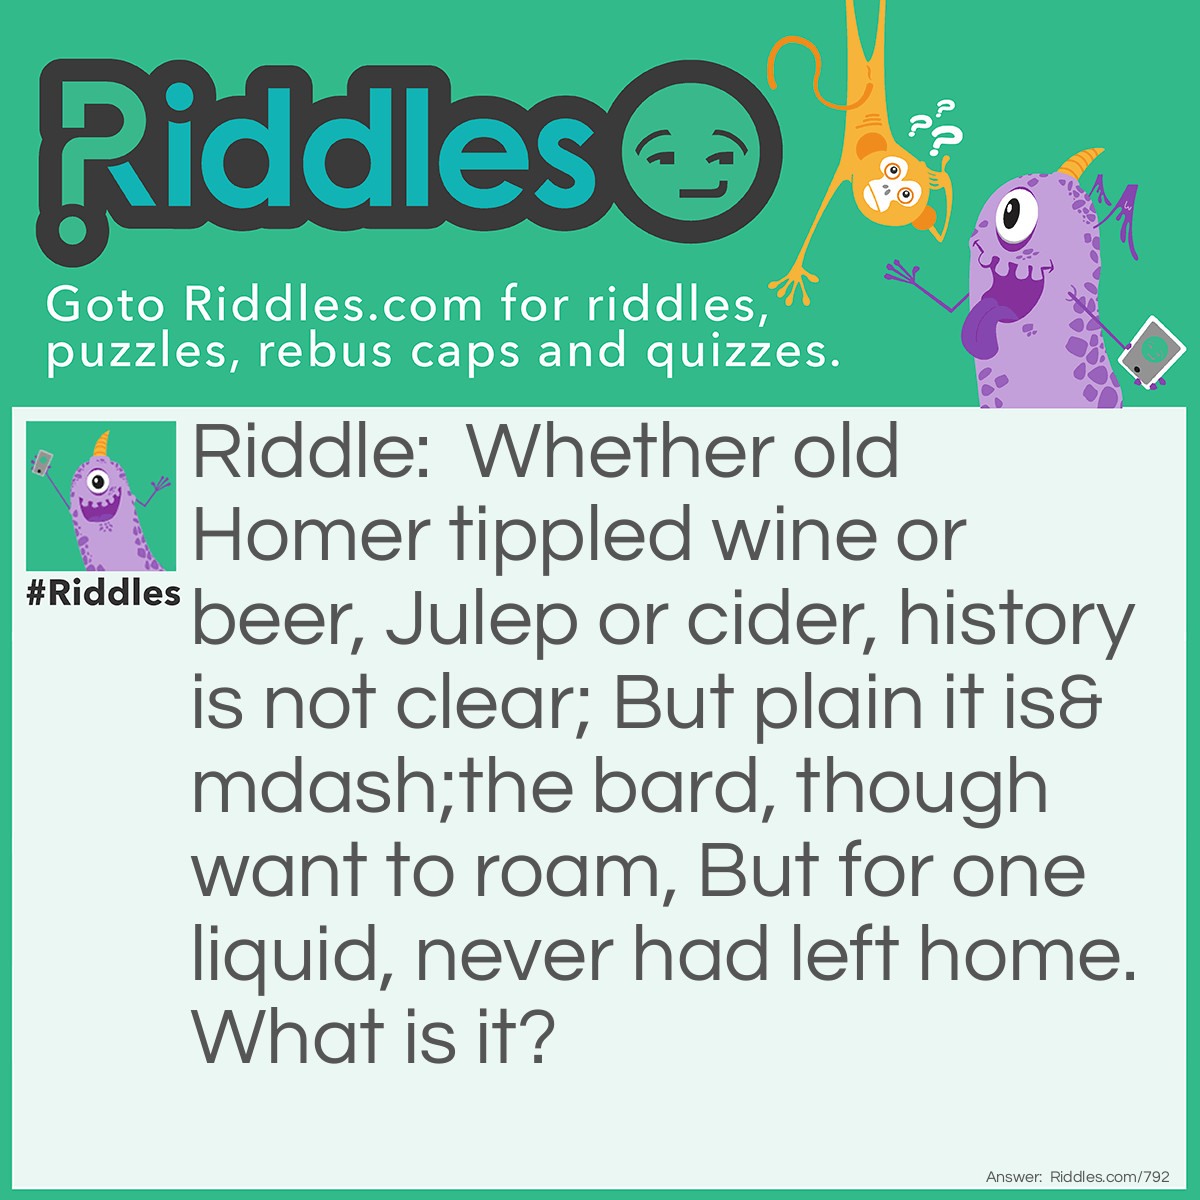 Riddle: Whether old Homer tippled wine or beer, Julep or cider, history is not clear; But plain it is-the bard, though want to roam, But for one liquid, never had left home.
What is it? Answer: The letter R.